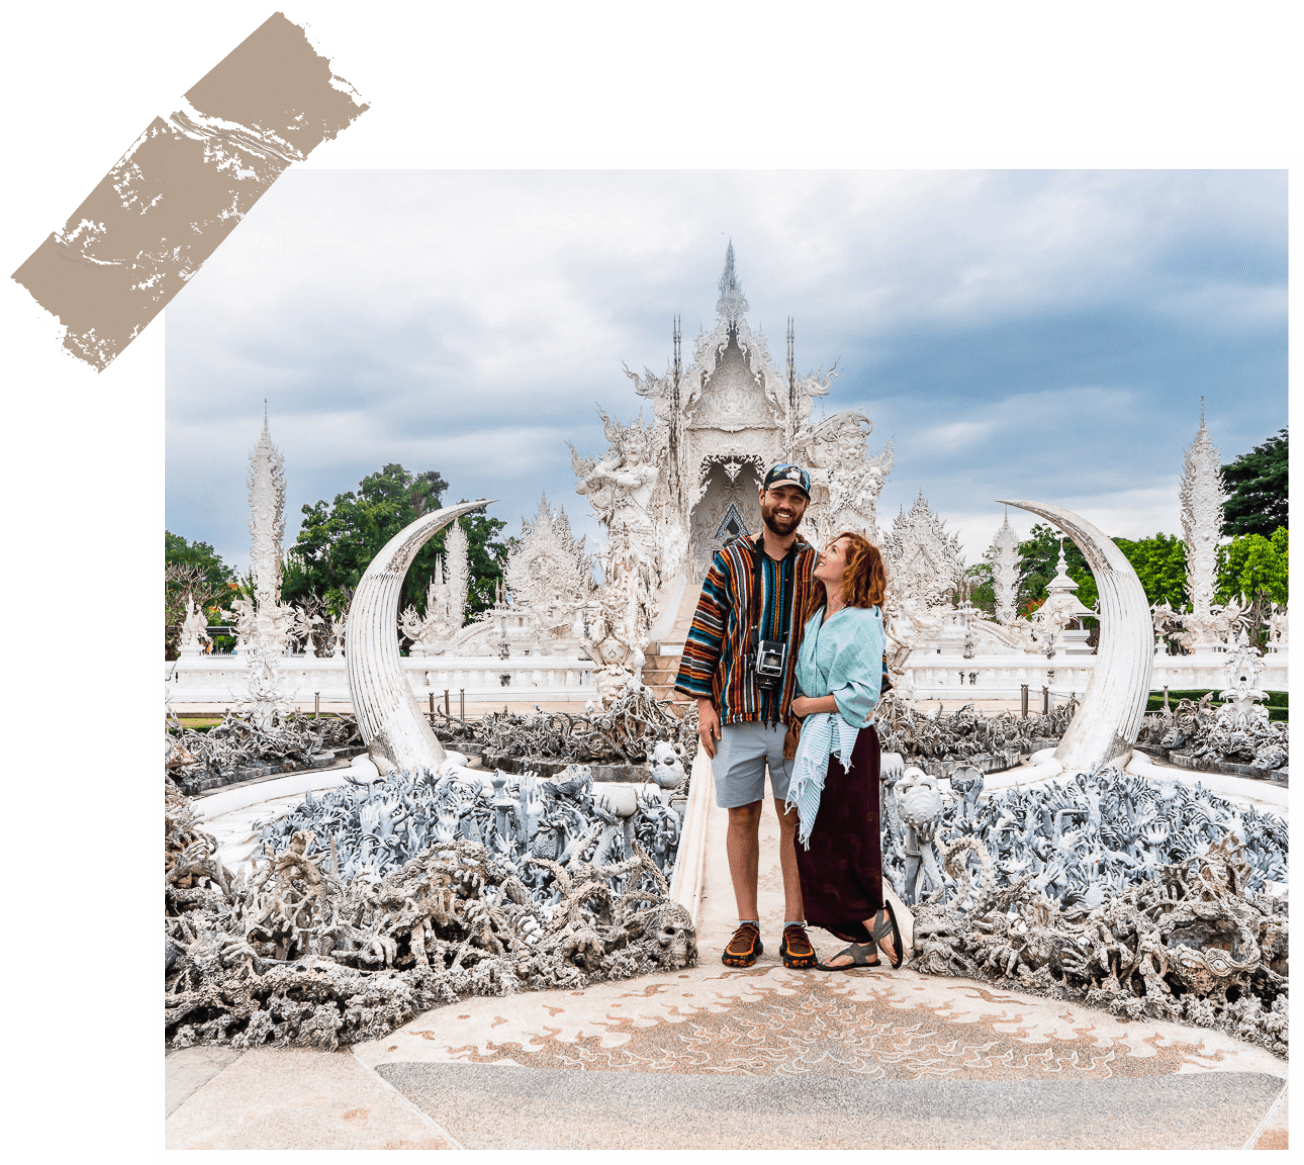 Meg and Kevin posing in front of the ornate white sculptures of the wat rong khun temple in thailand.